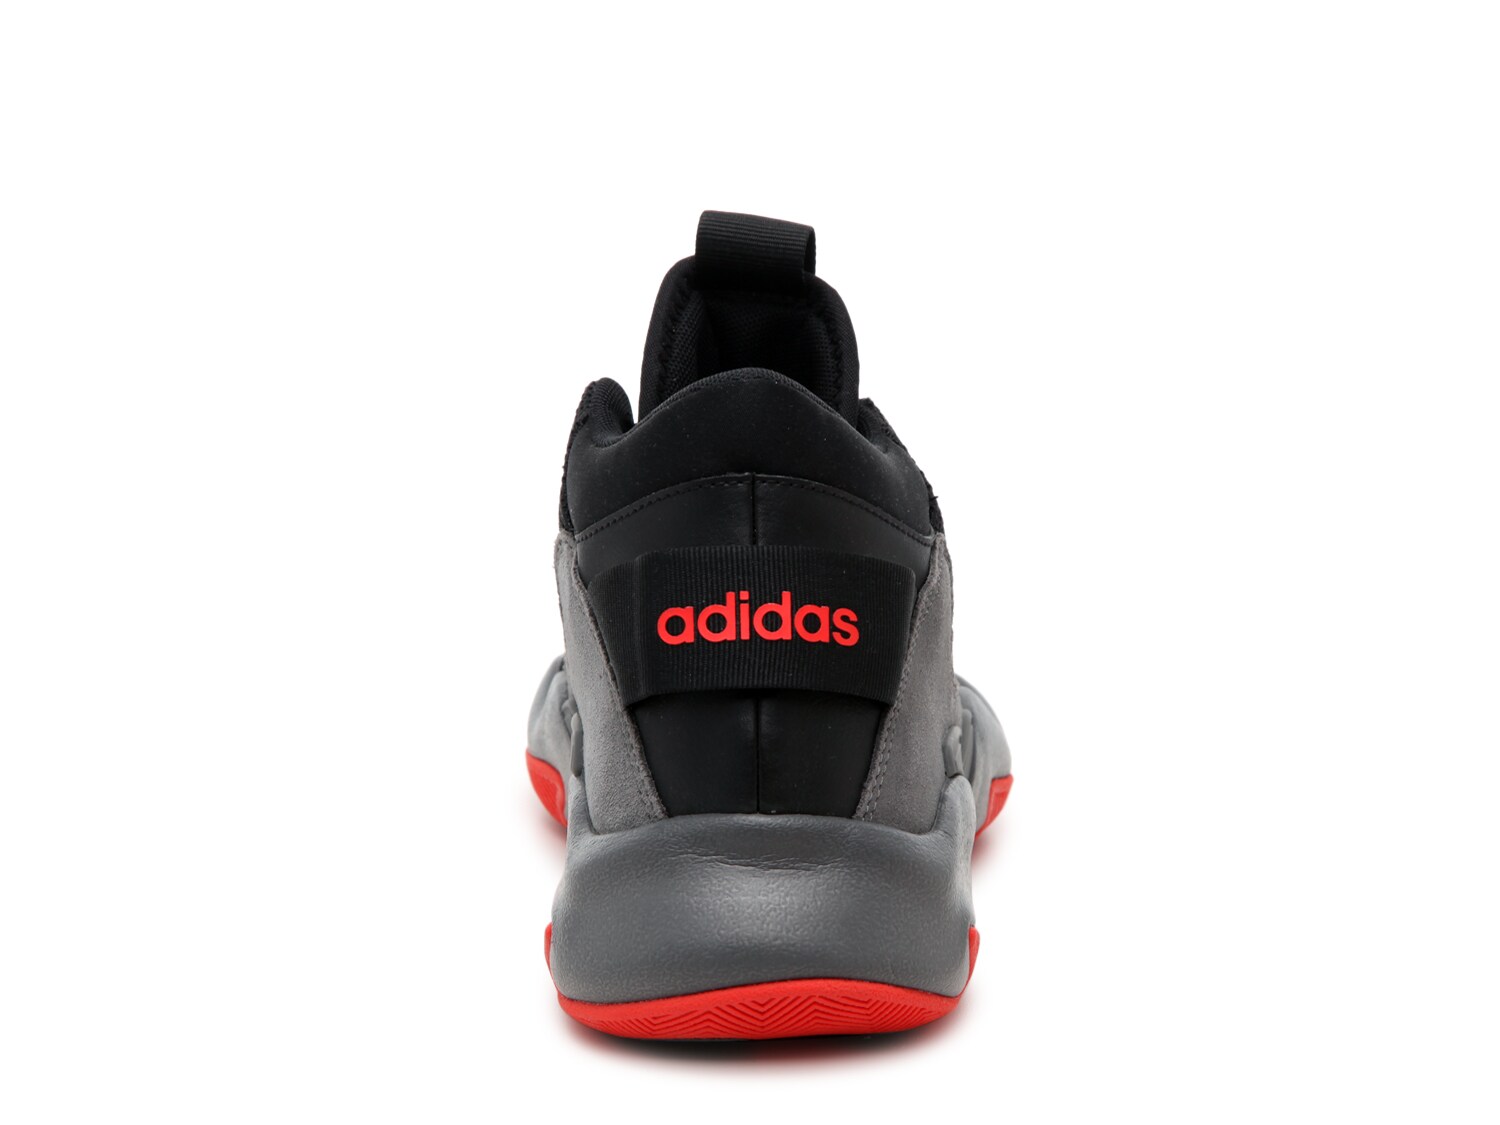 adidas street check shoes review